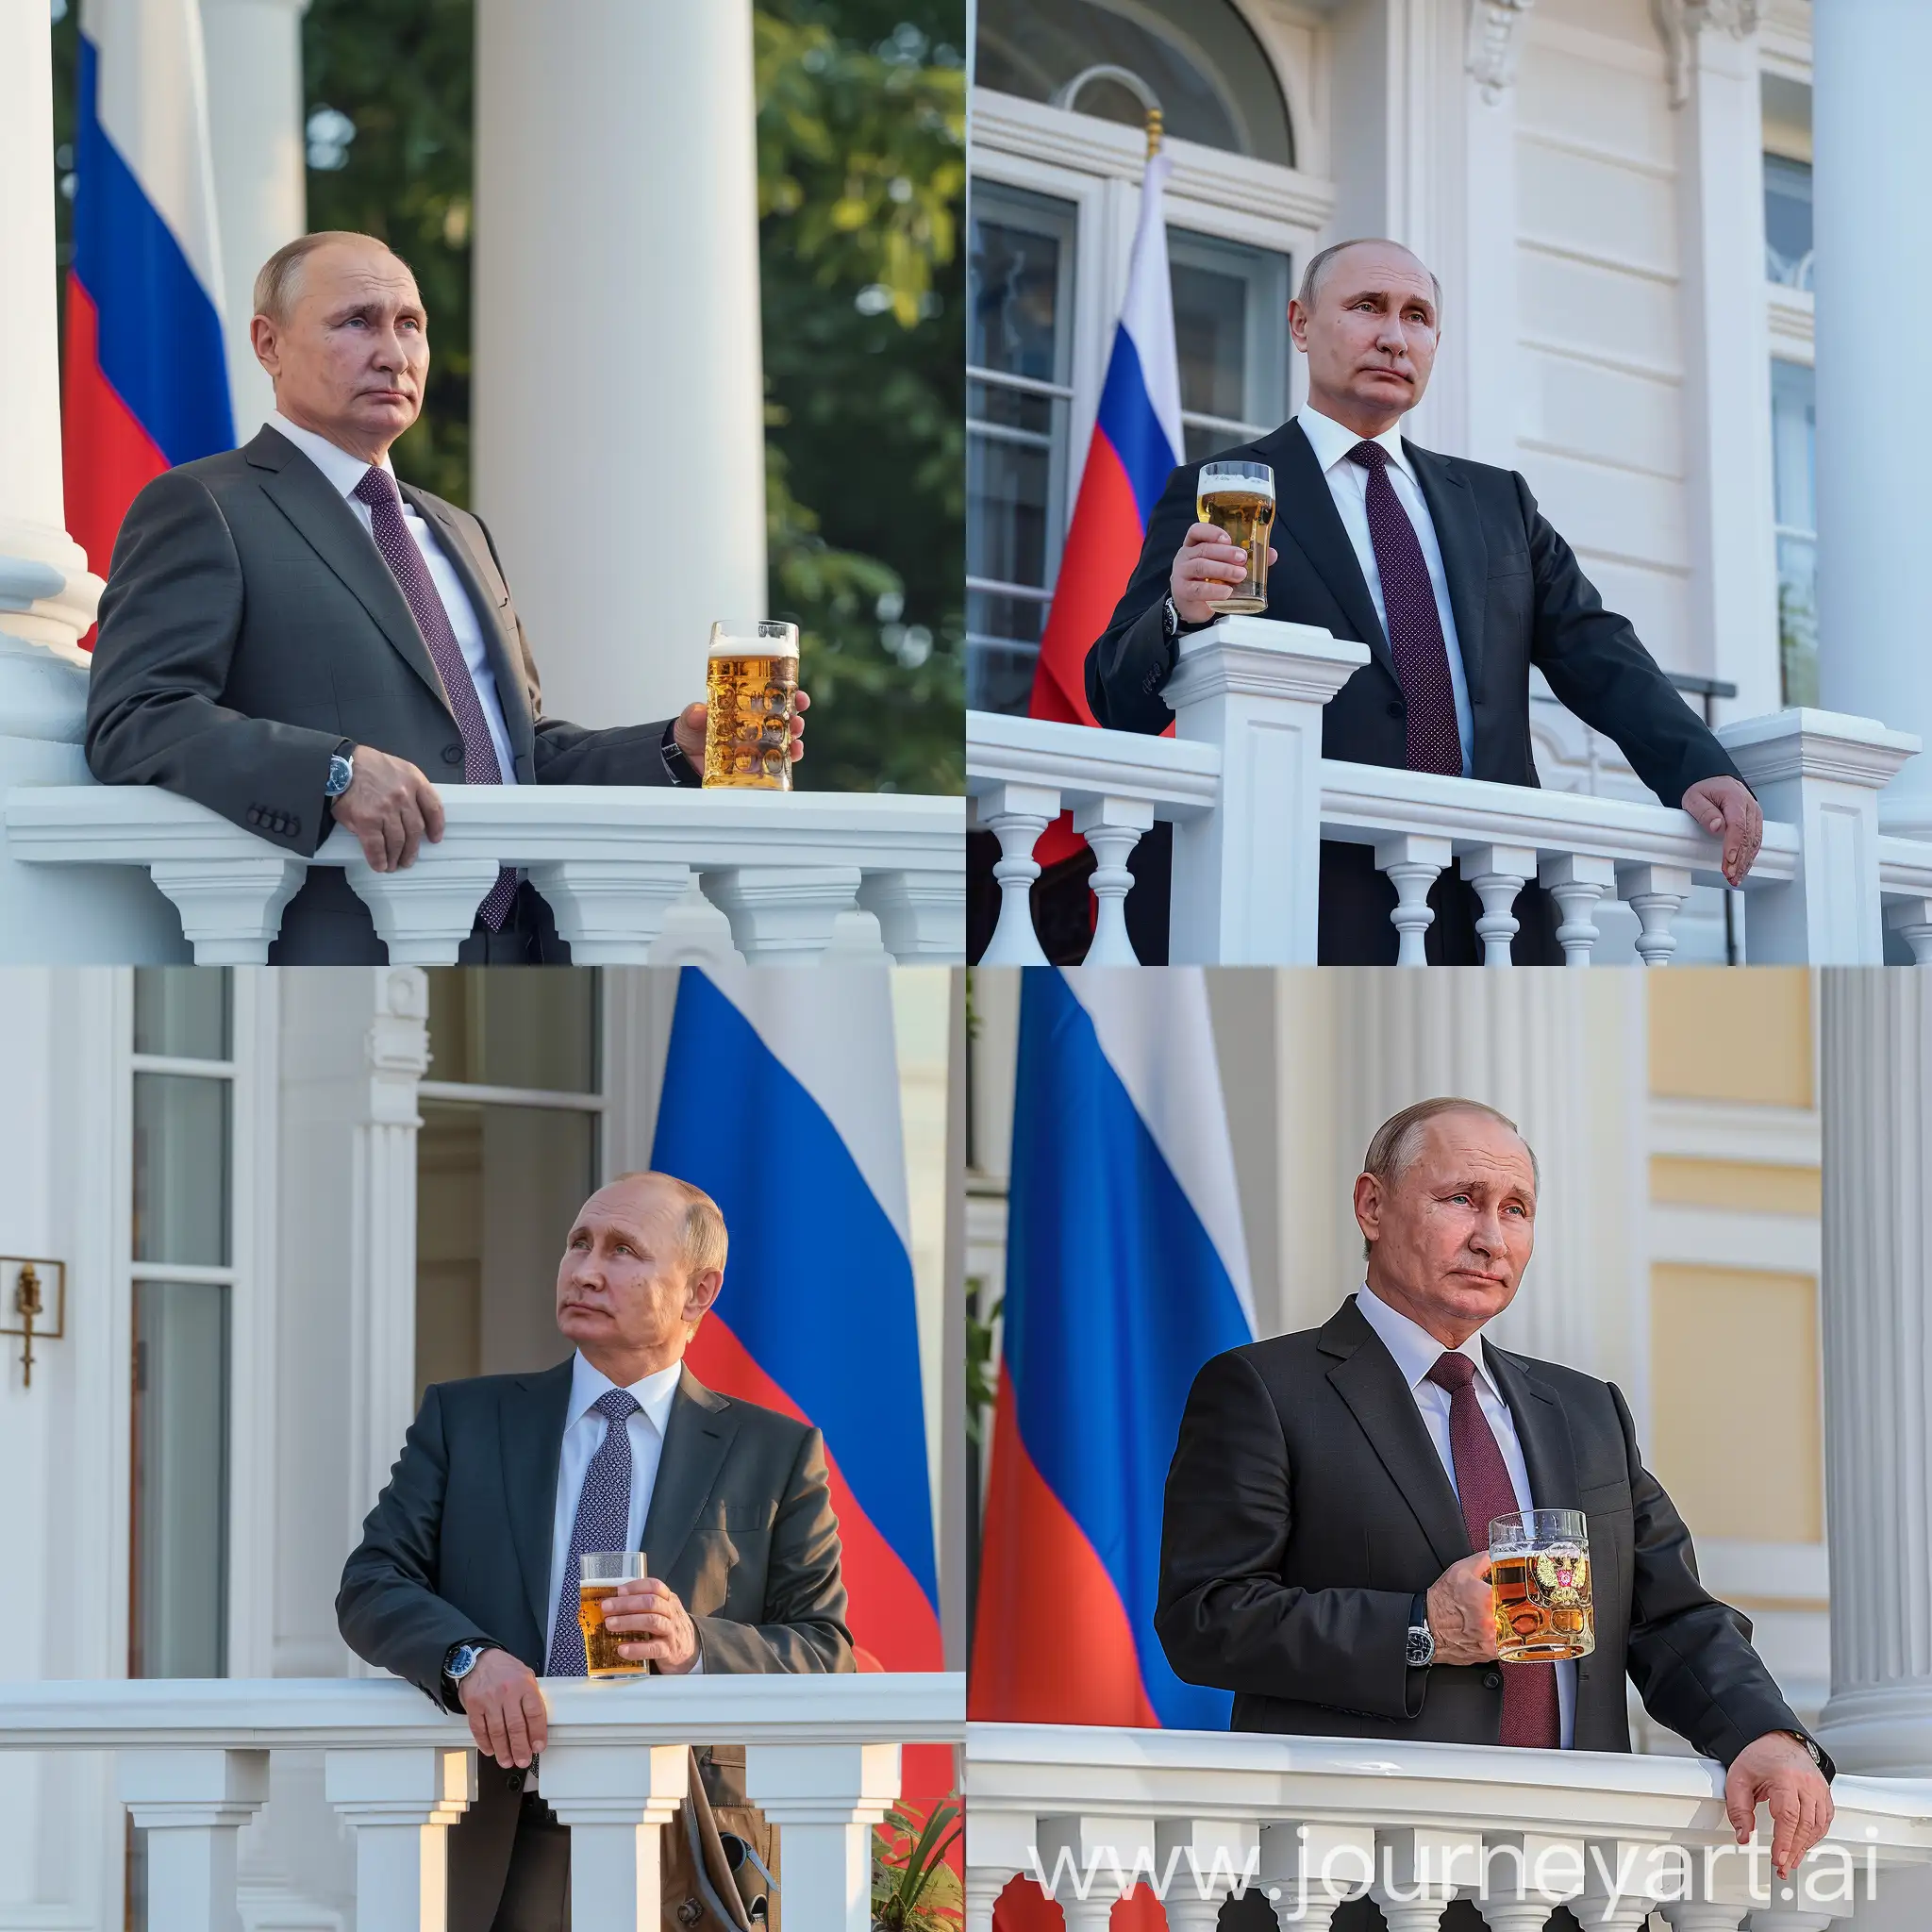 Vladimir-Putin-Standing-on-White-Mansion-Balcony-with-Beer-Glass